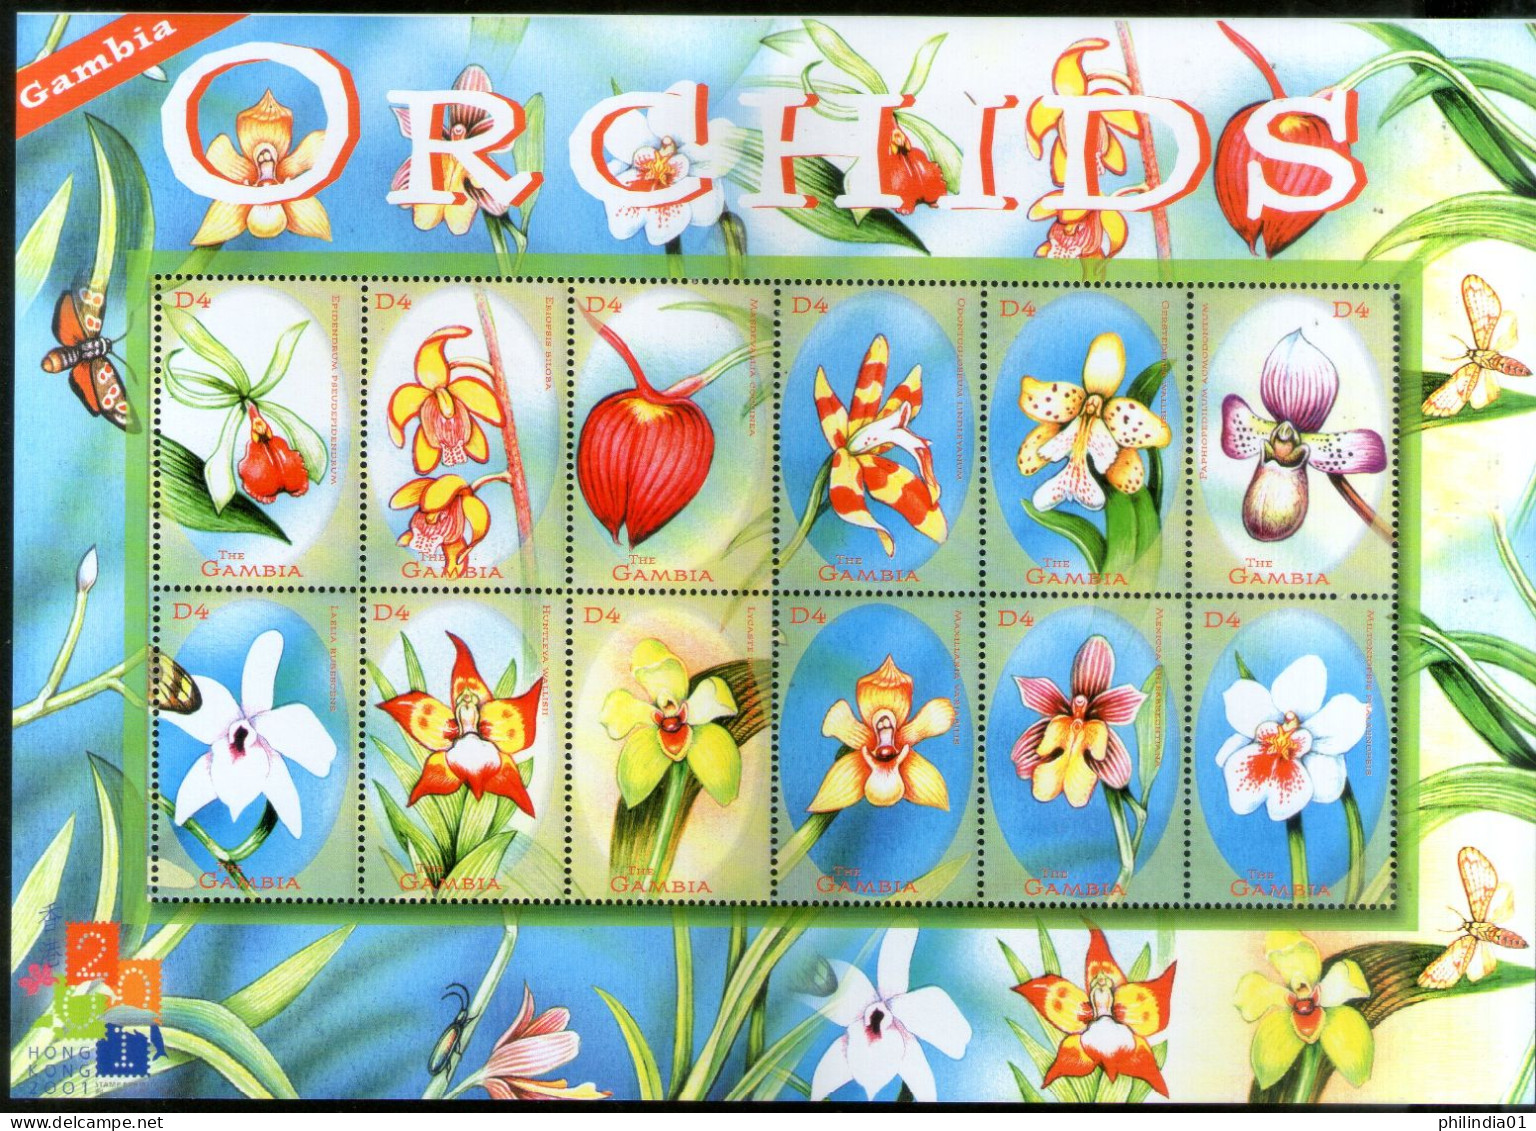 Gambia 2001 Orchids Flowers Insect Sc 2401 Sheetlet MNH # 19009 - Orchidées